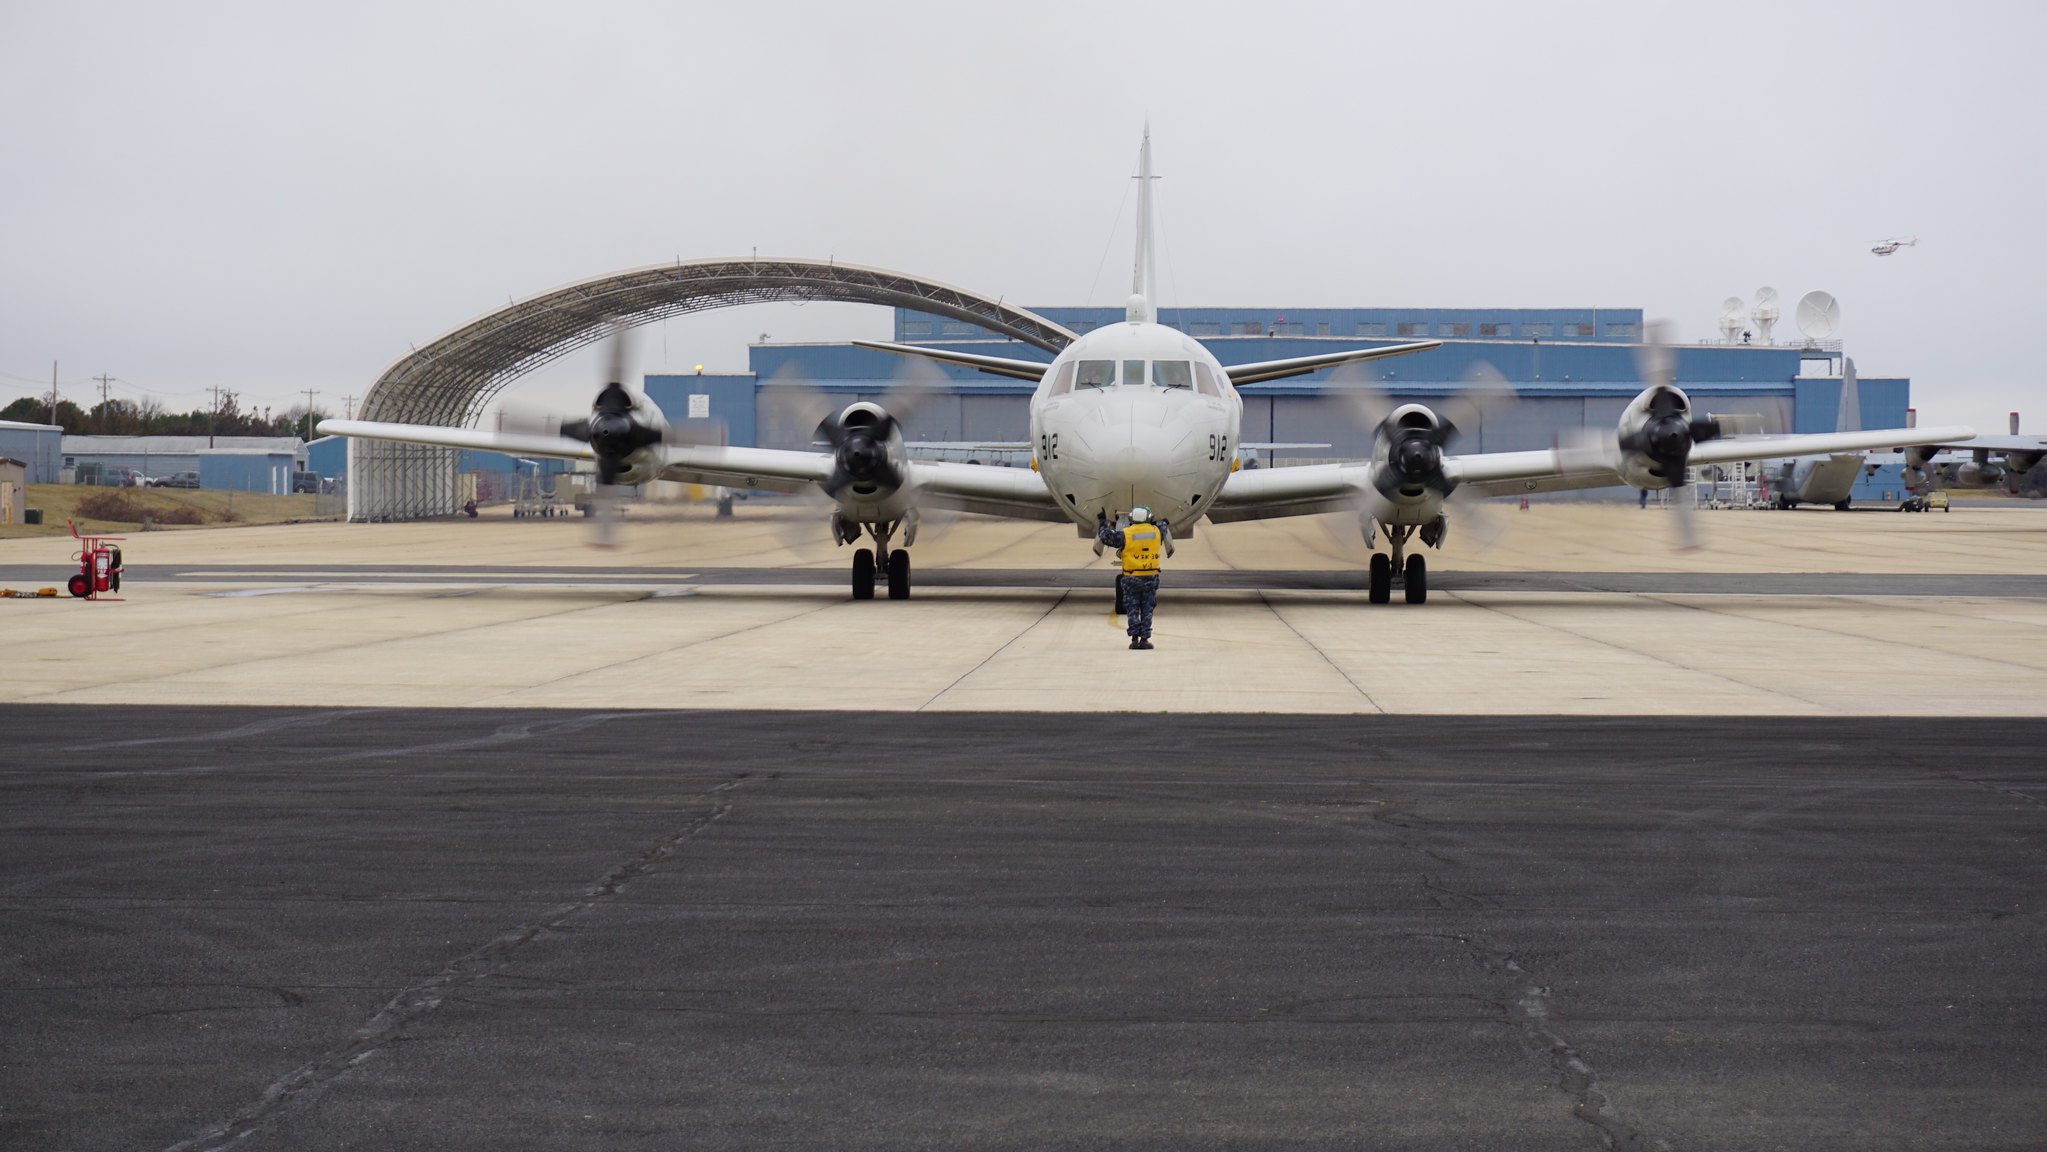 NASA's DC-8 plane on a runway facing the camera against a gray sky. The planes four propellers on its wings are turning. A person stands in front of the nose of the plane.